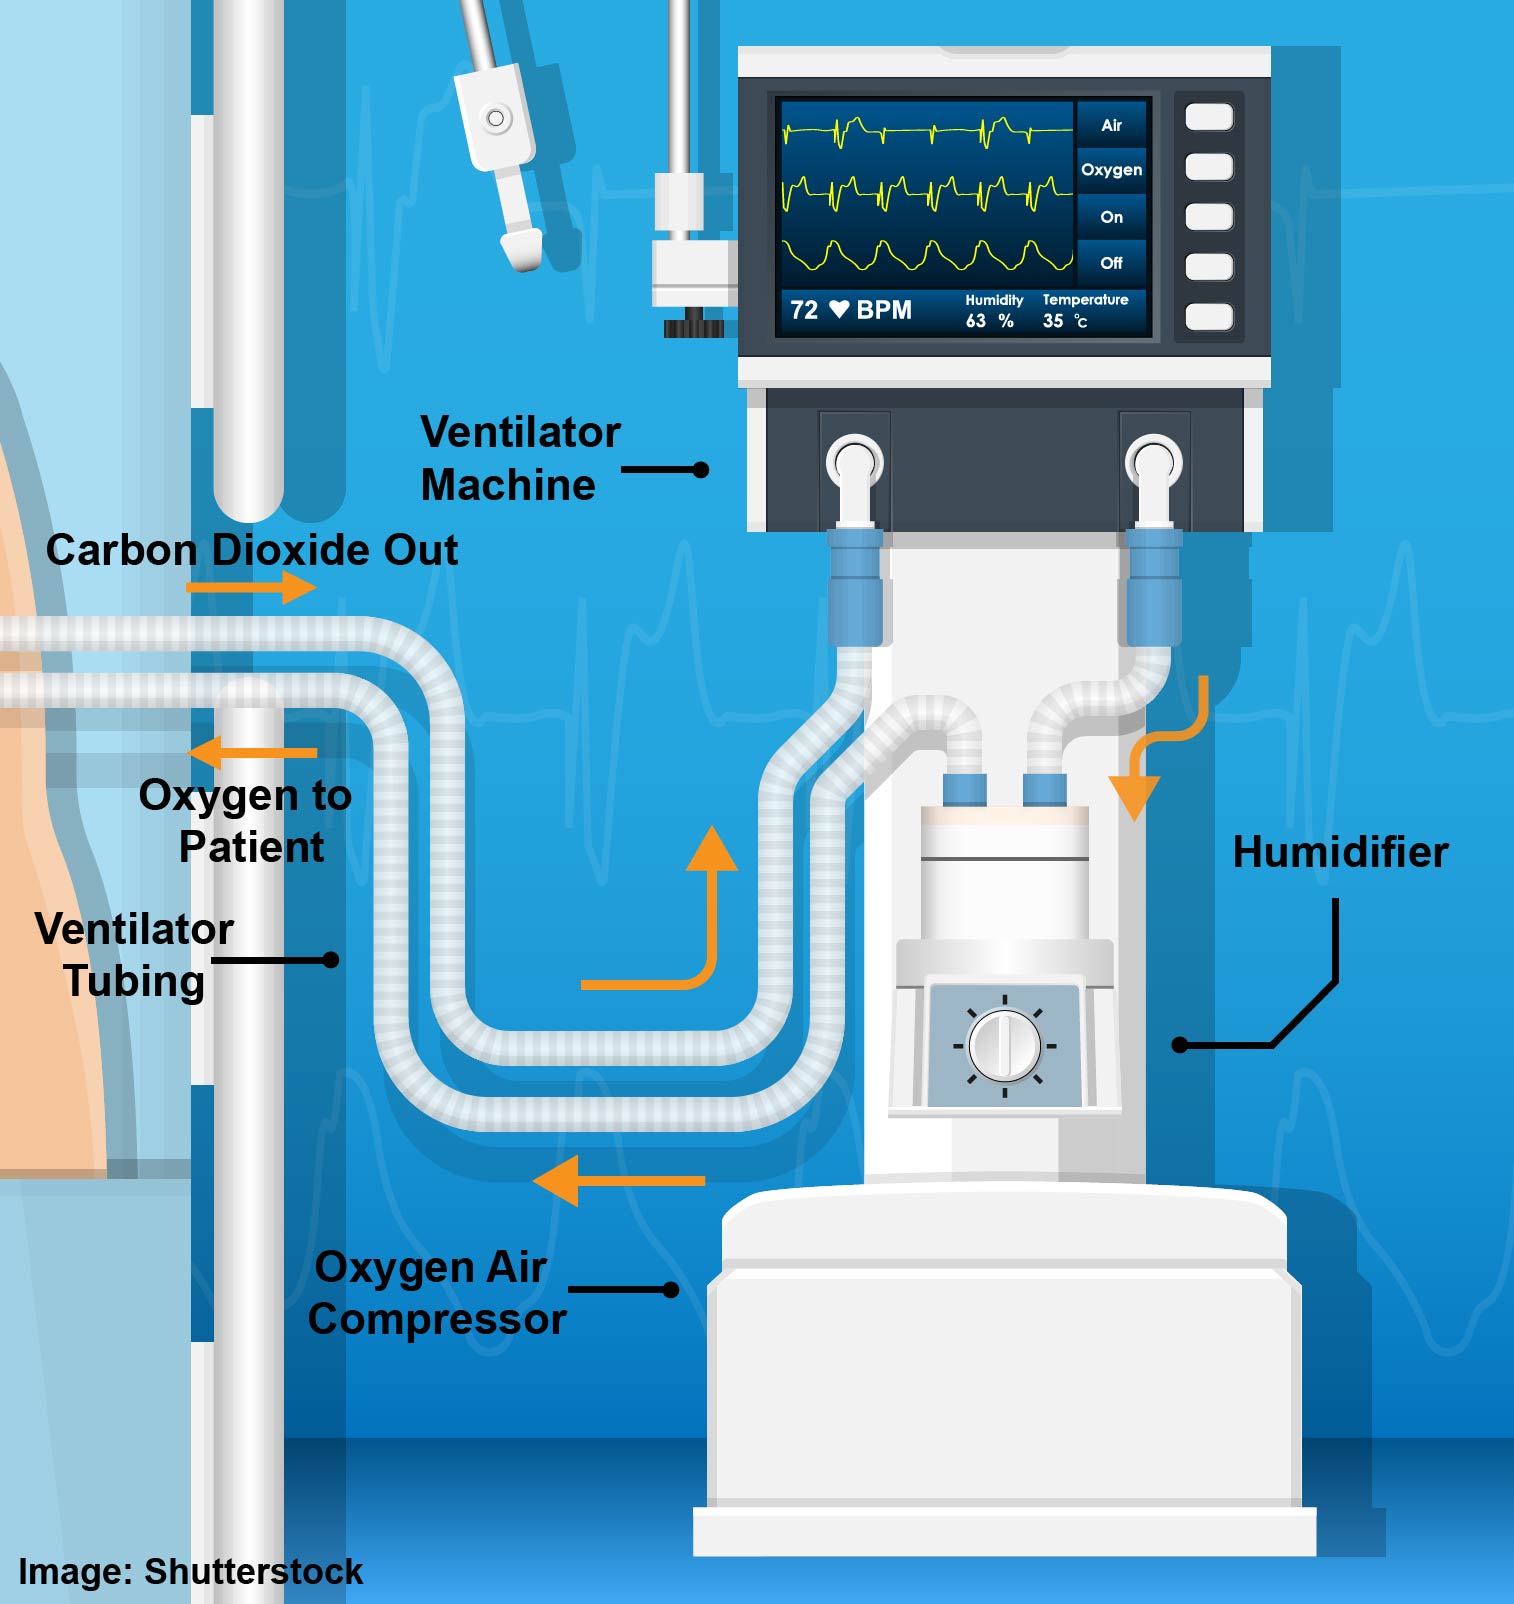 Components and Diagram of a Mechanical Ventilator